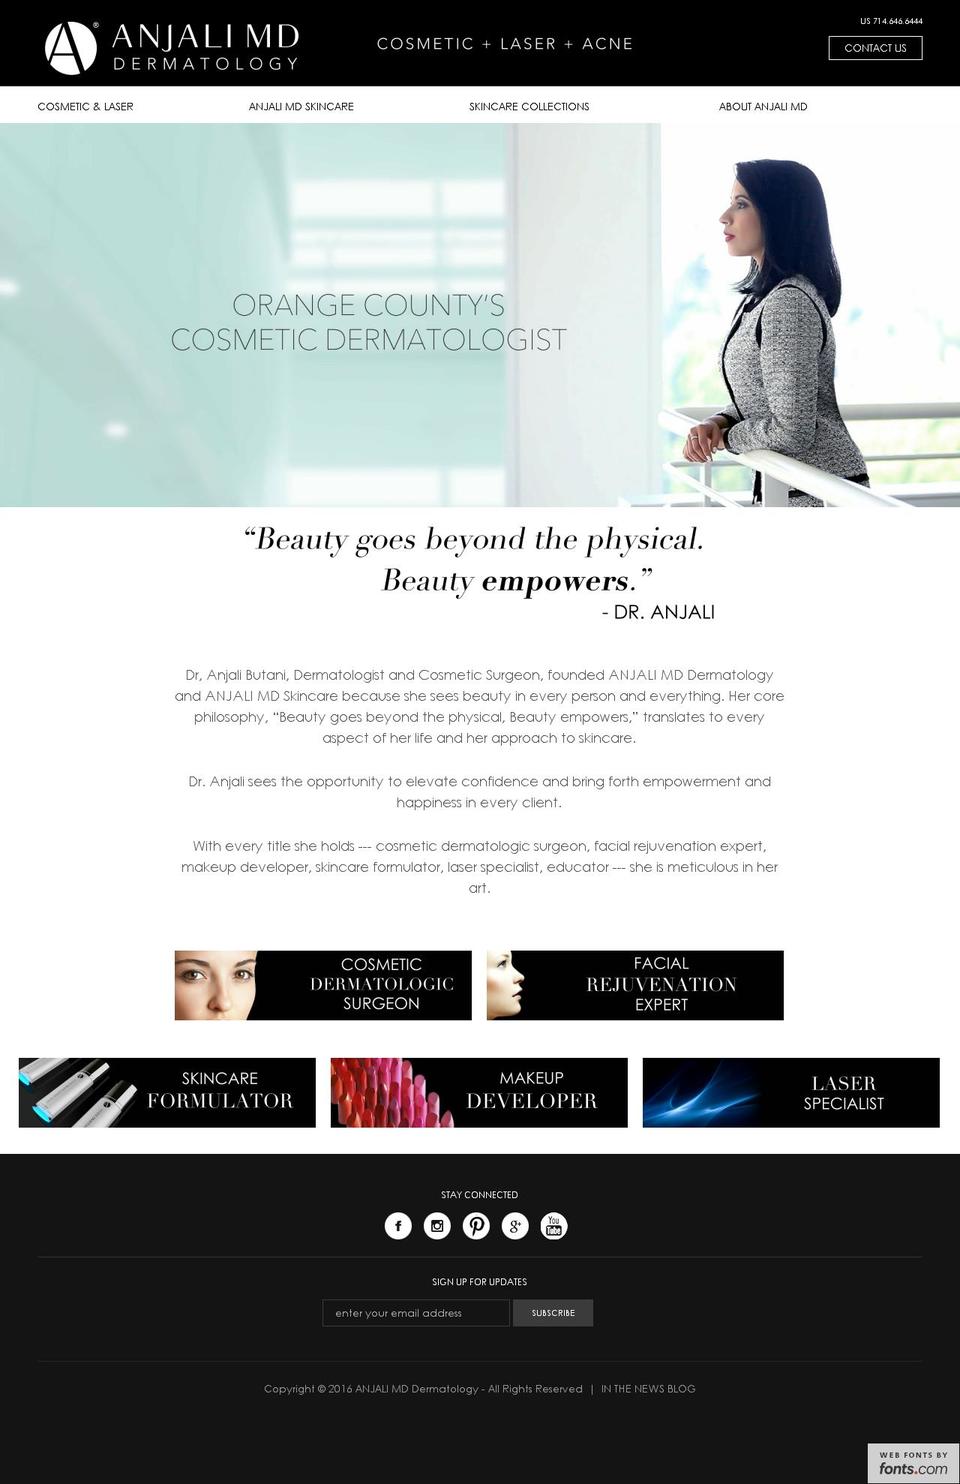 Anjali MD Site 2016 Shopify theme site example orangelaser.org